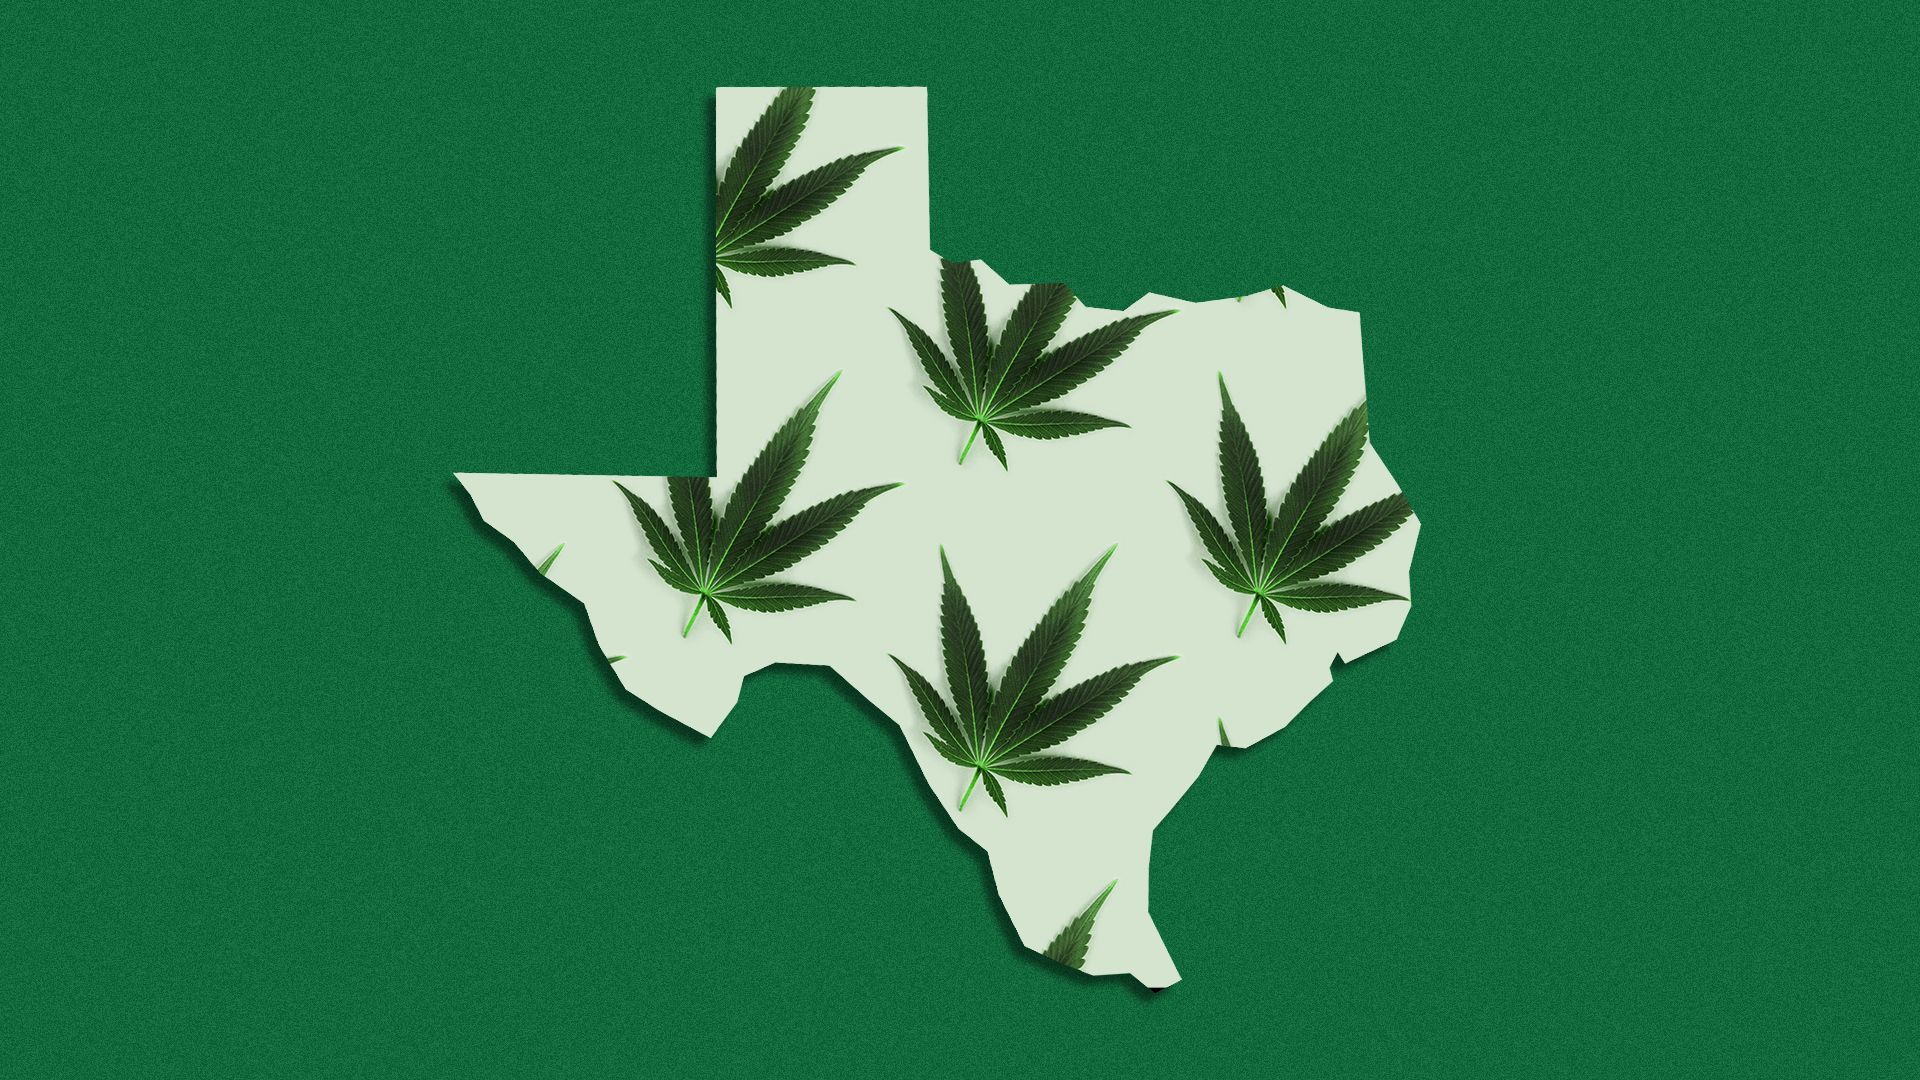 Illustration of a pattern of marijuana leaves filling the state of Texas.